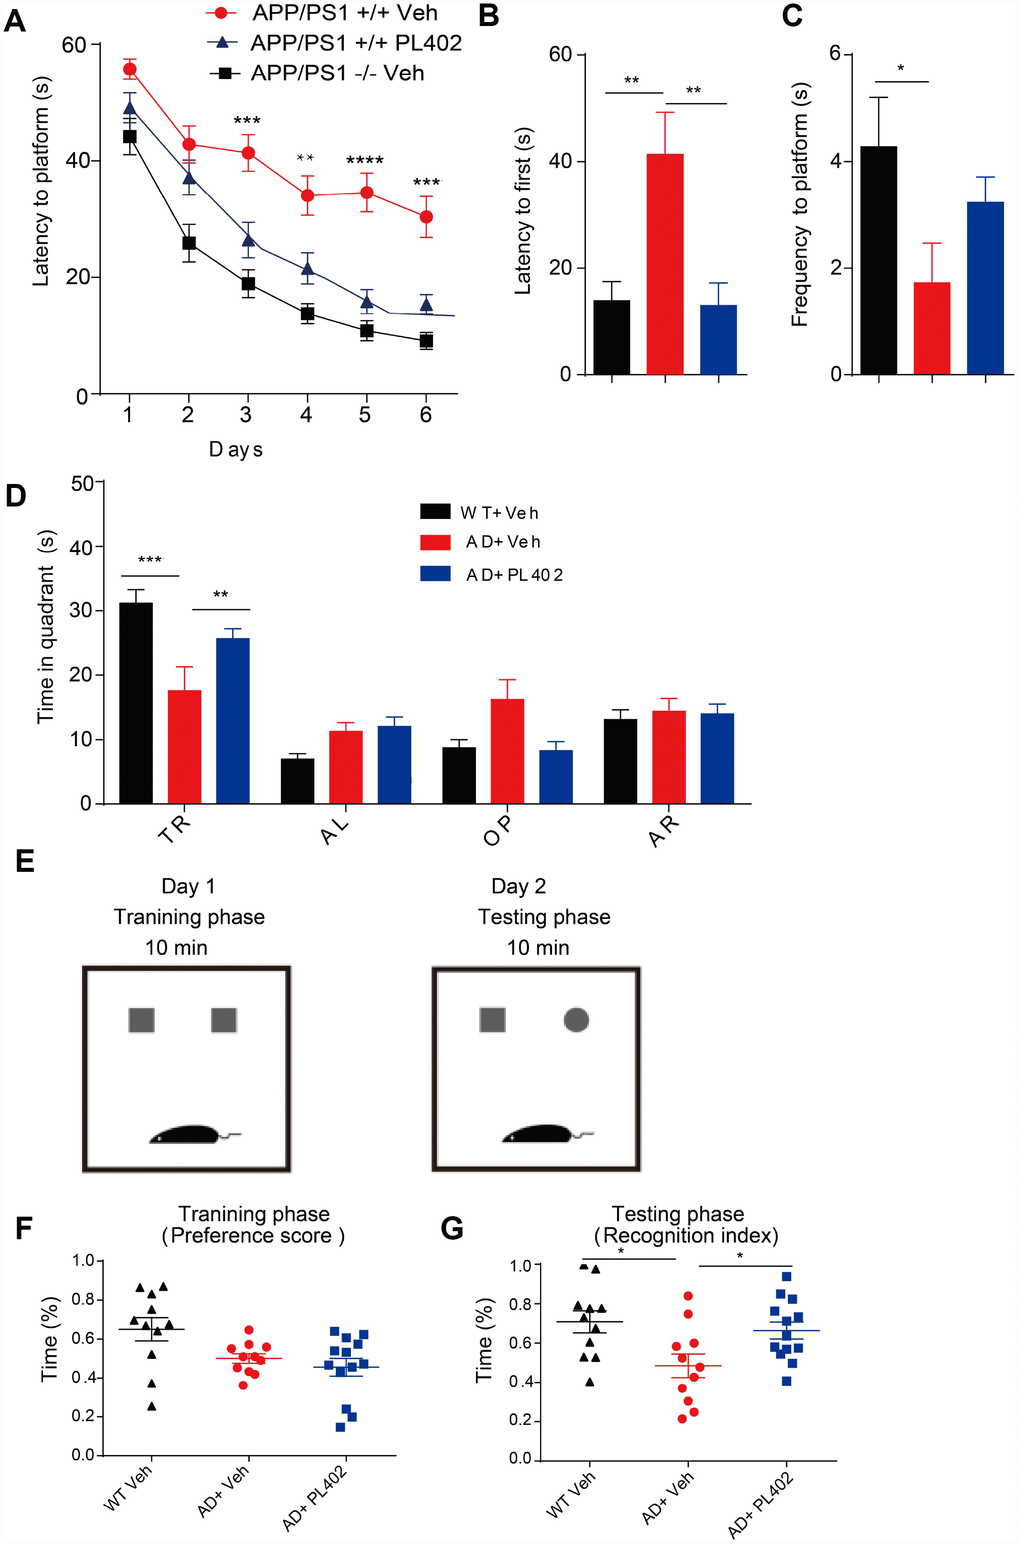 PL402 ameliorates cognitive deficits and improves memory retention in APP/PS1 mice. (A) Morris water maze (MWM) test of wild type (WT) mice and vehicle- or PL402 treated APP/PS1 mice. (B) Latency to platform first of each group mice in day 7 probe trial test. (C) Frequency to platform in probe trial for each group of mice in day 7 probe trial test. (D) Time spent of each group mice in the target quadrant in day 7 probe trial test. TQ, target quadrant; AR, adjacent right; OP, opposite; AL, adjacent left. Data are presented as mean ± SEM, each group n = 6, ∗p A–D) or one-way ANOVA (B–C) followed by Bonferroni test. (E–G) Diagram of Novel object recognition (NOR) analysis(E). (F–G) Preference scores of training phase (F) and Recognition Index of testing phase (G) during a 10-min testing phase are shown, respectively. Data are presented as mean ± SEM, WT group n = 11, APP/PS1 Vehicle group n = 11, APP/PS1 PL402 group n = 13. ∗p 